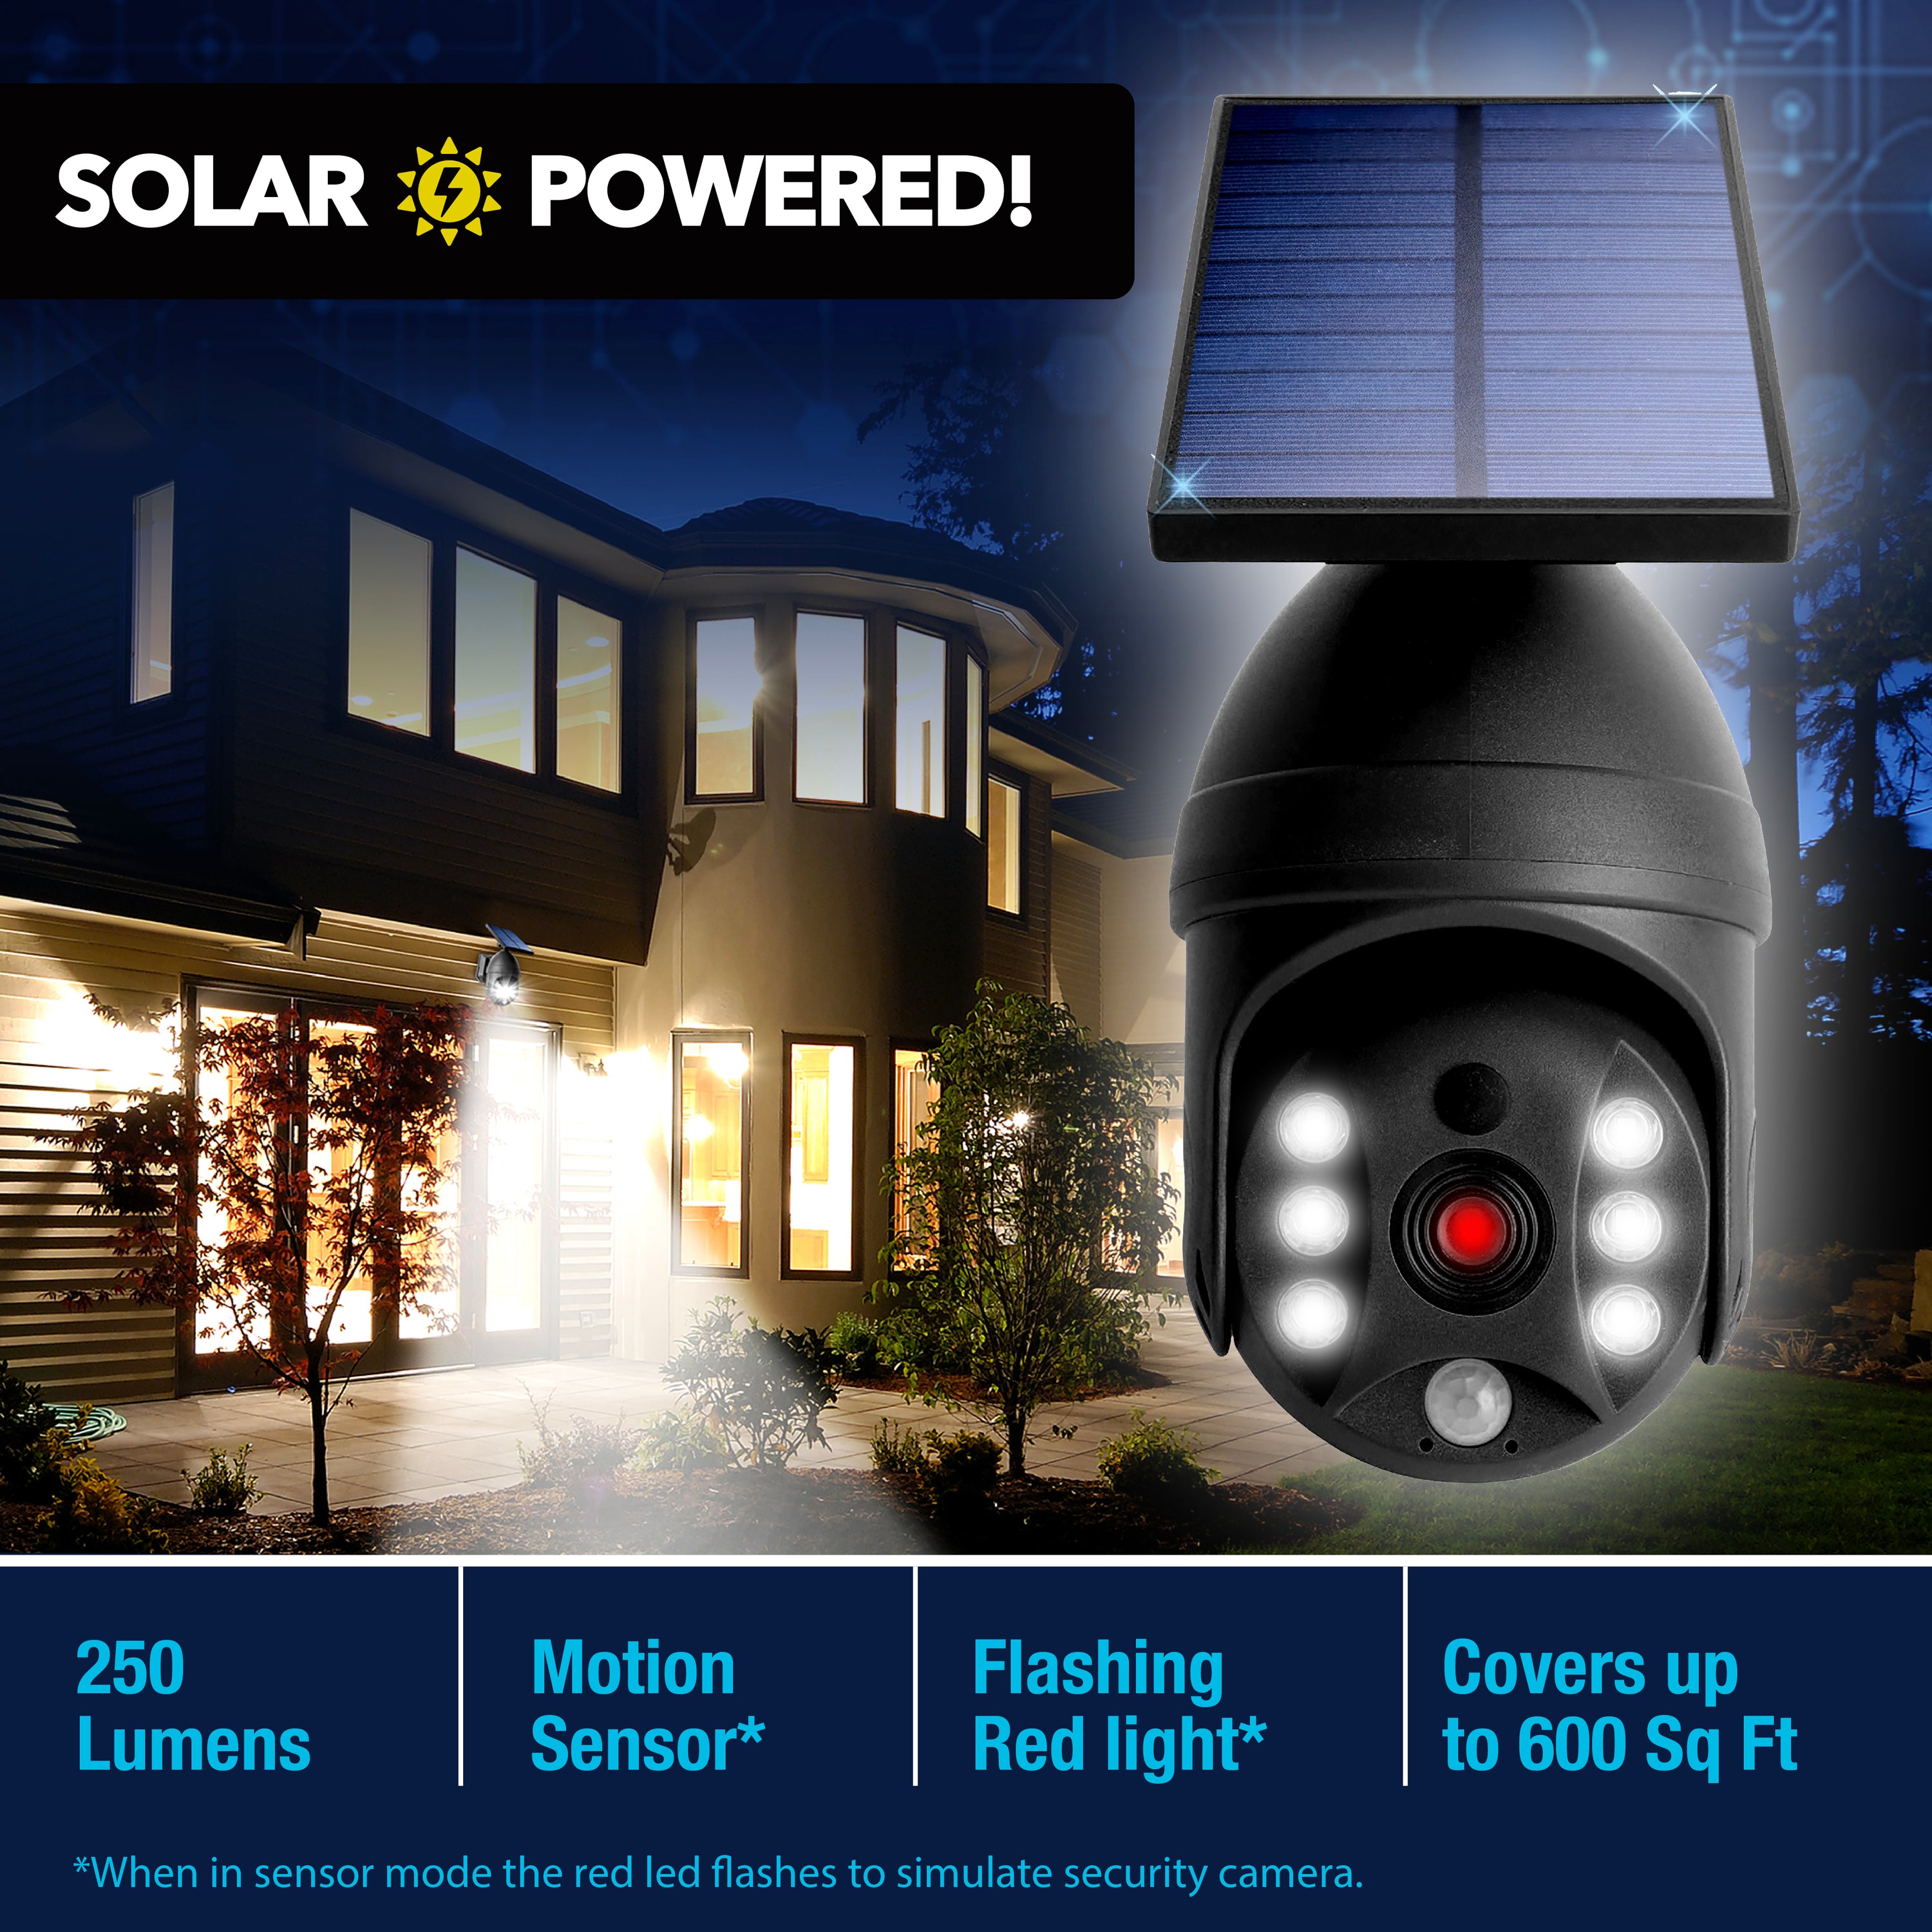 Bell + Howell Bionic Spotlight Security Extreme Solar Powered, Motion Sensor, Red Light - Looks like a security camera!